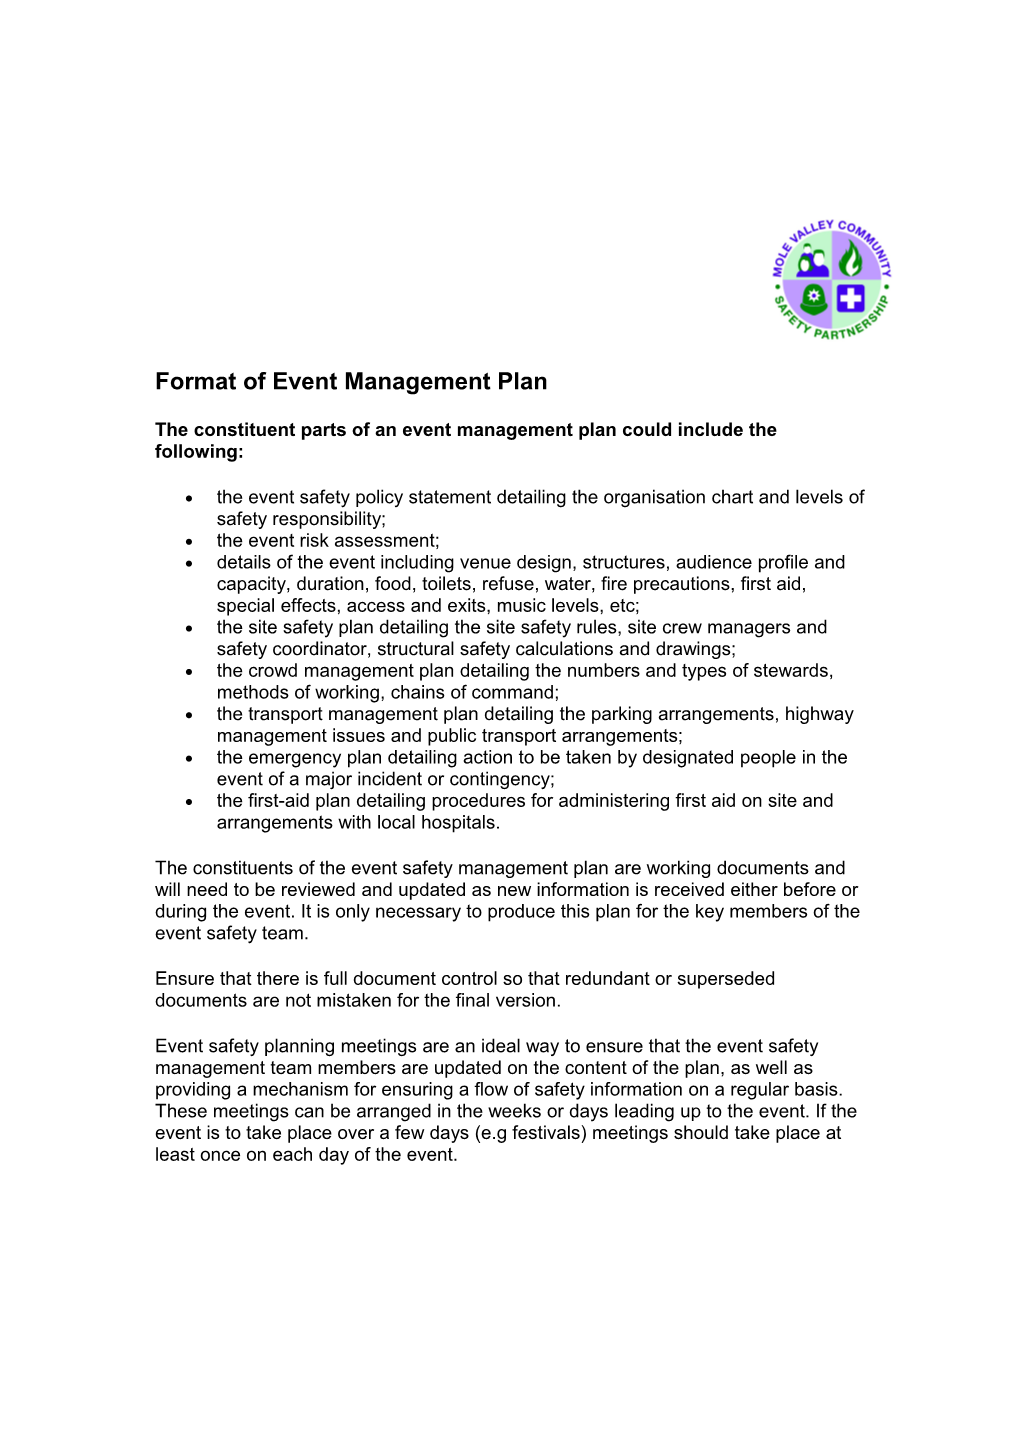 The Constituent Parts of an Event Management Plan Could Include the Following